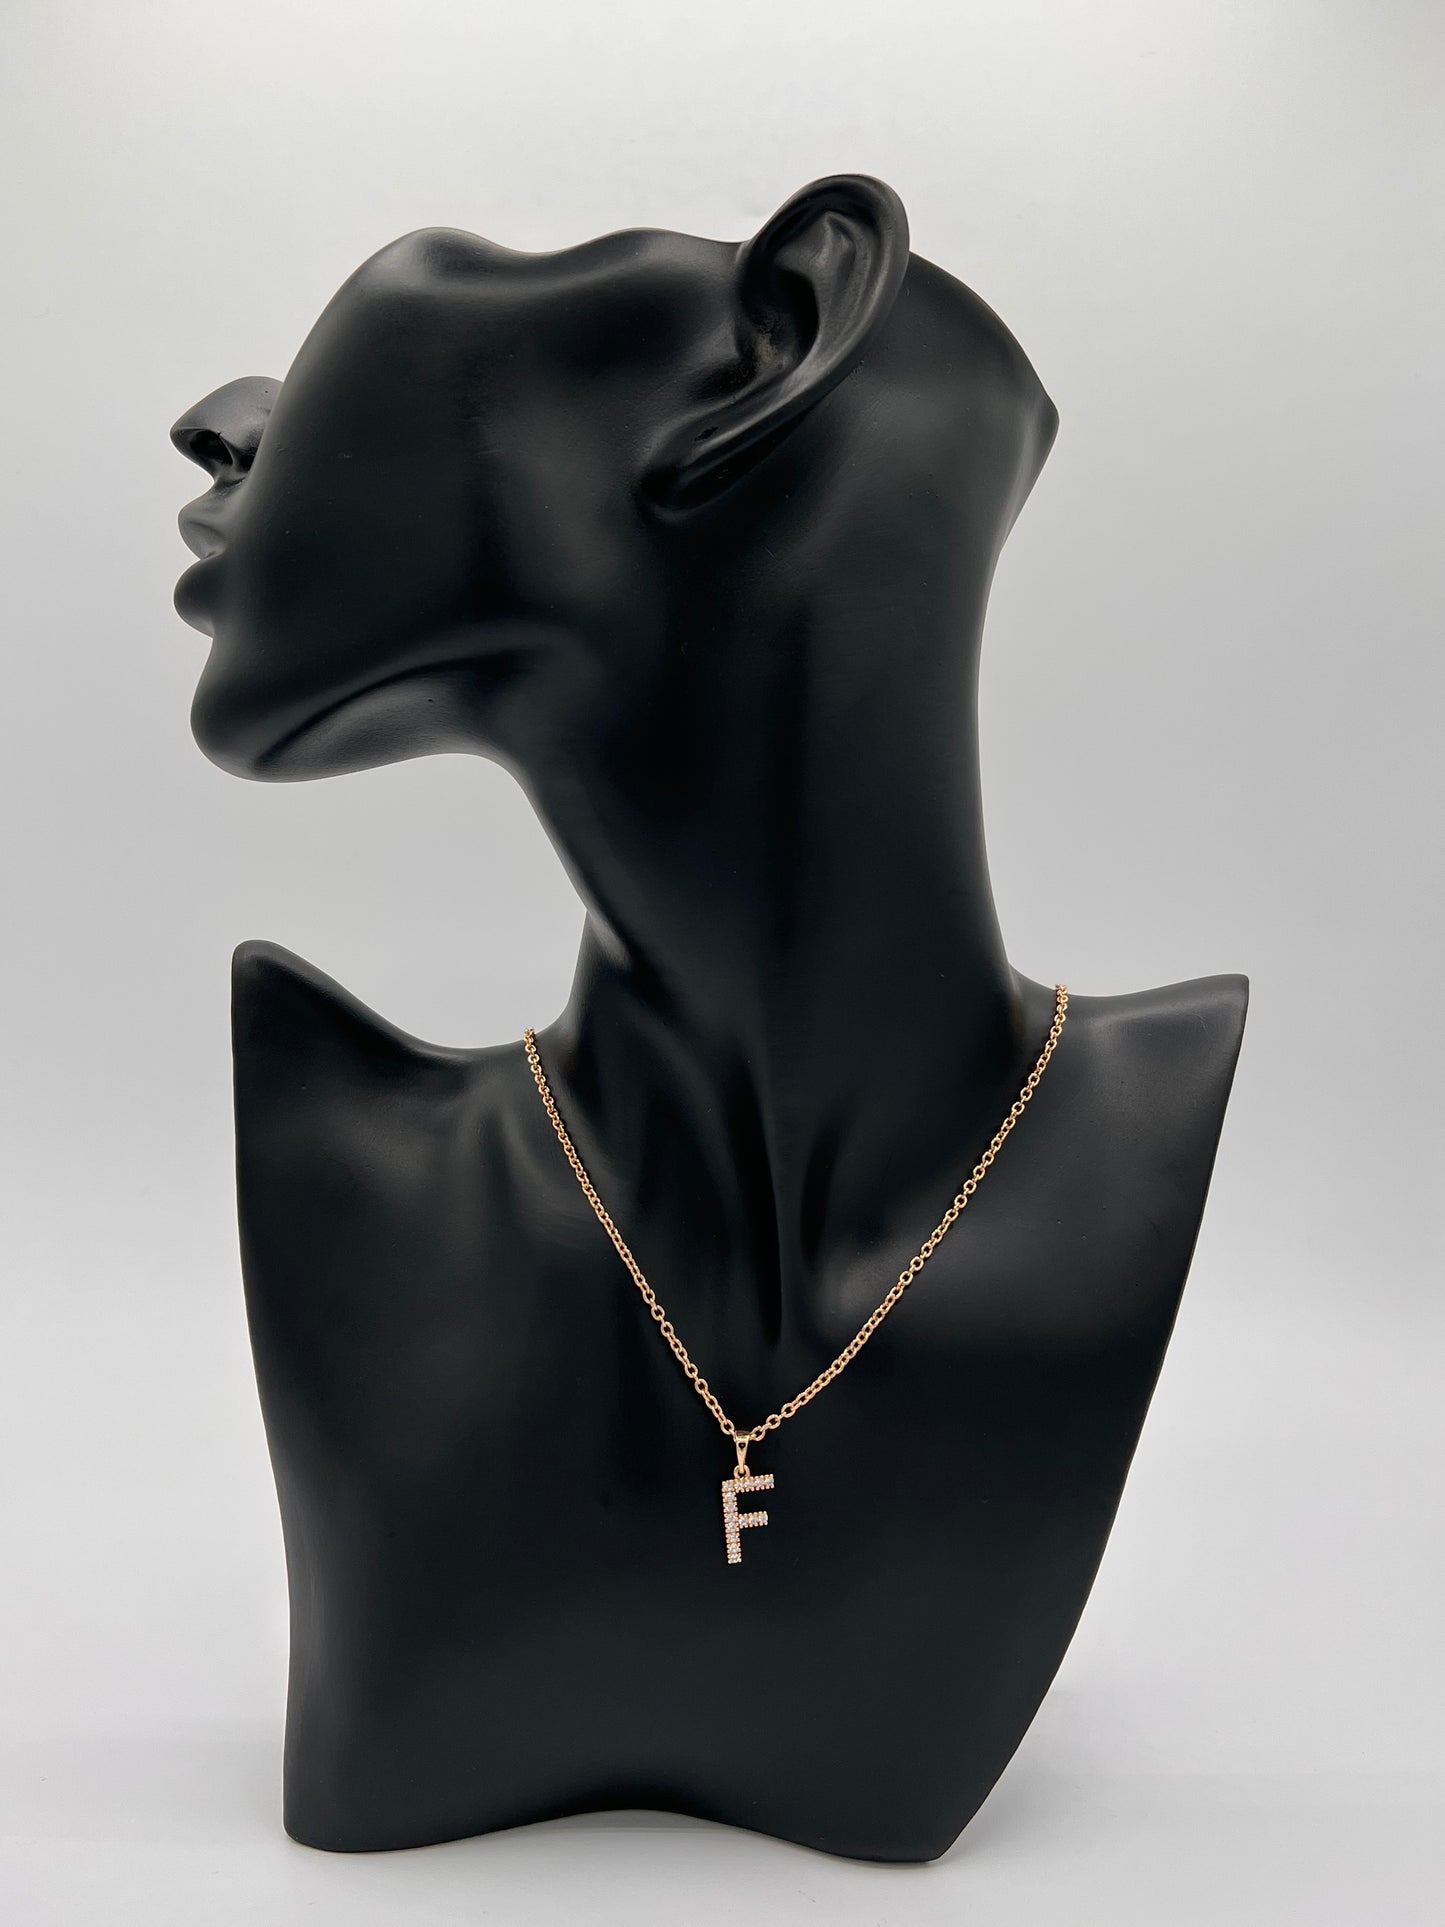 18K Gold-Plated Necklace, Initial Pendant, Brass Material, Nickel-Free, Hypoallergenic, Suitable for Sensitive Skin, Personalized Elegance, Custom Jewelry.40cm linked gold plated chain with Capital letter T  the letter F is embellished with 3 A cubic zircons